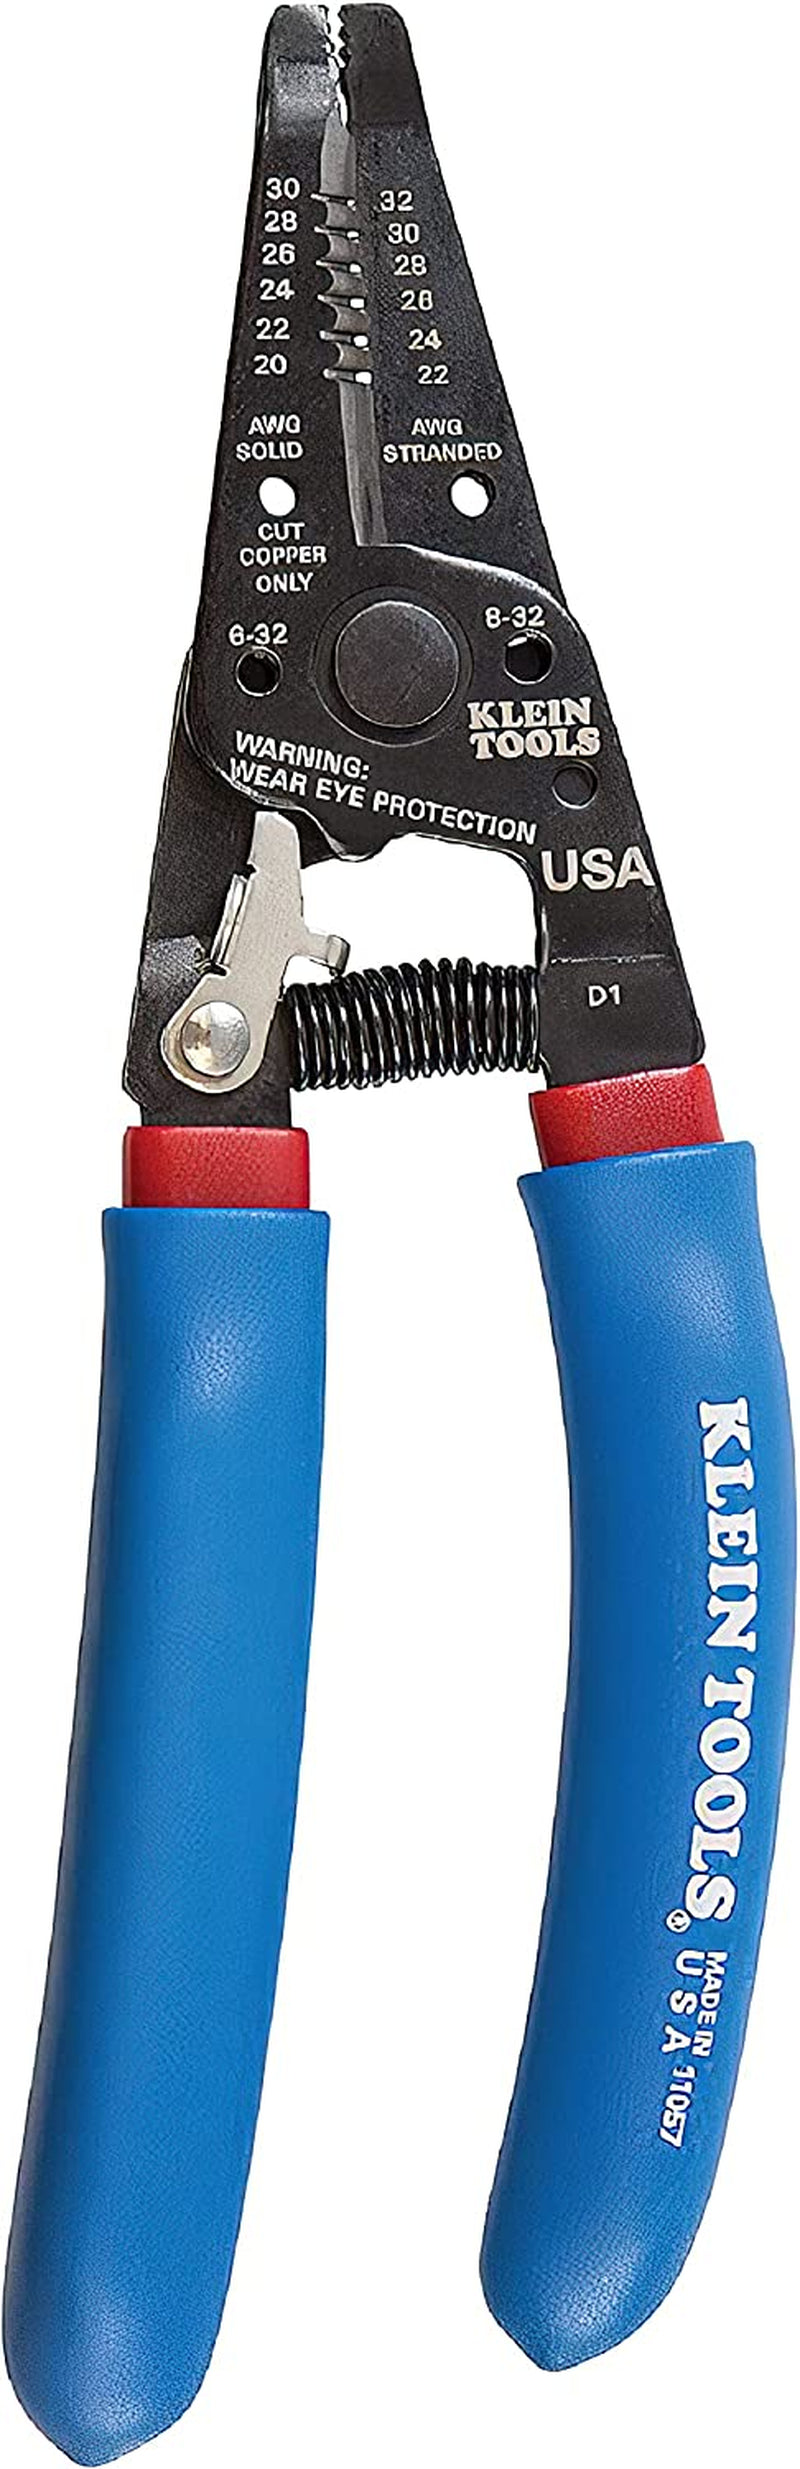 KLEIN TOOLS, Klein Tools 11057 Wire Cutter/Wire Stripper, Heavy Duty Wire Cutter Stripper for 20-30 AWG Solid Wire and 22-32 AWG Stranded Wire